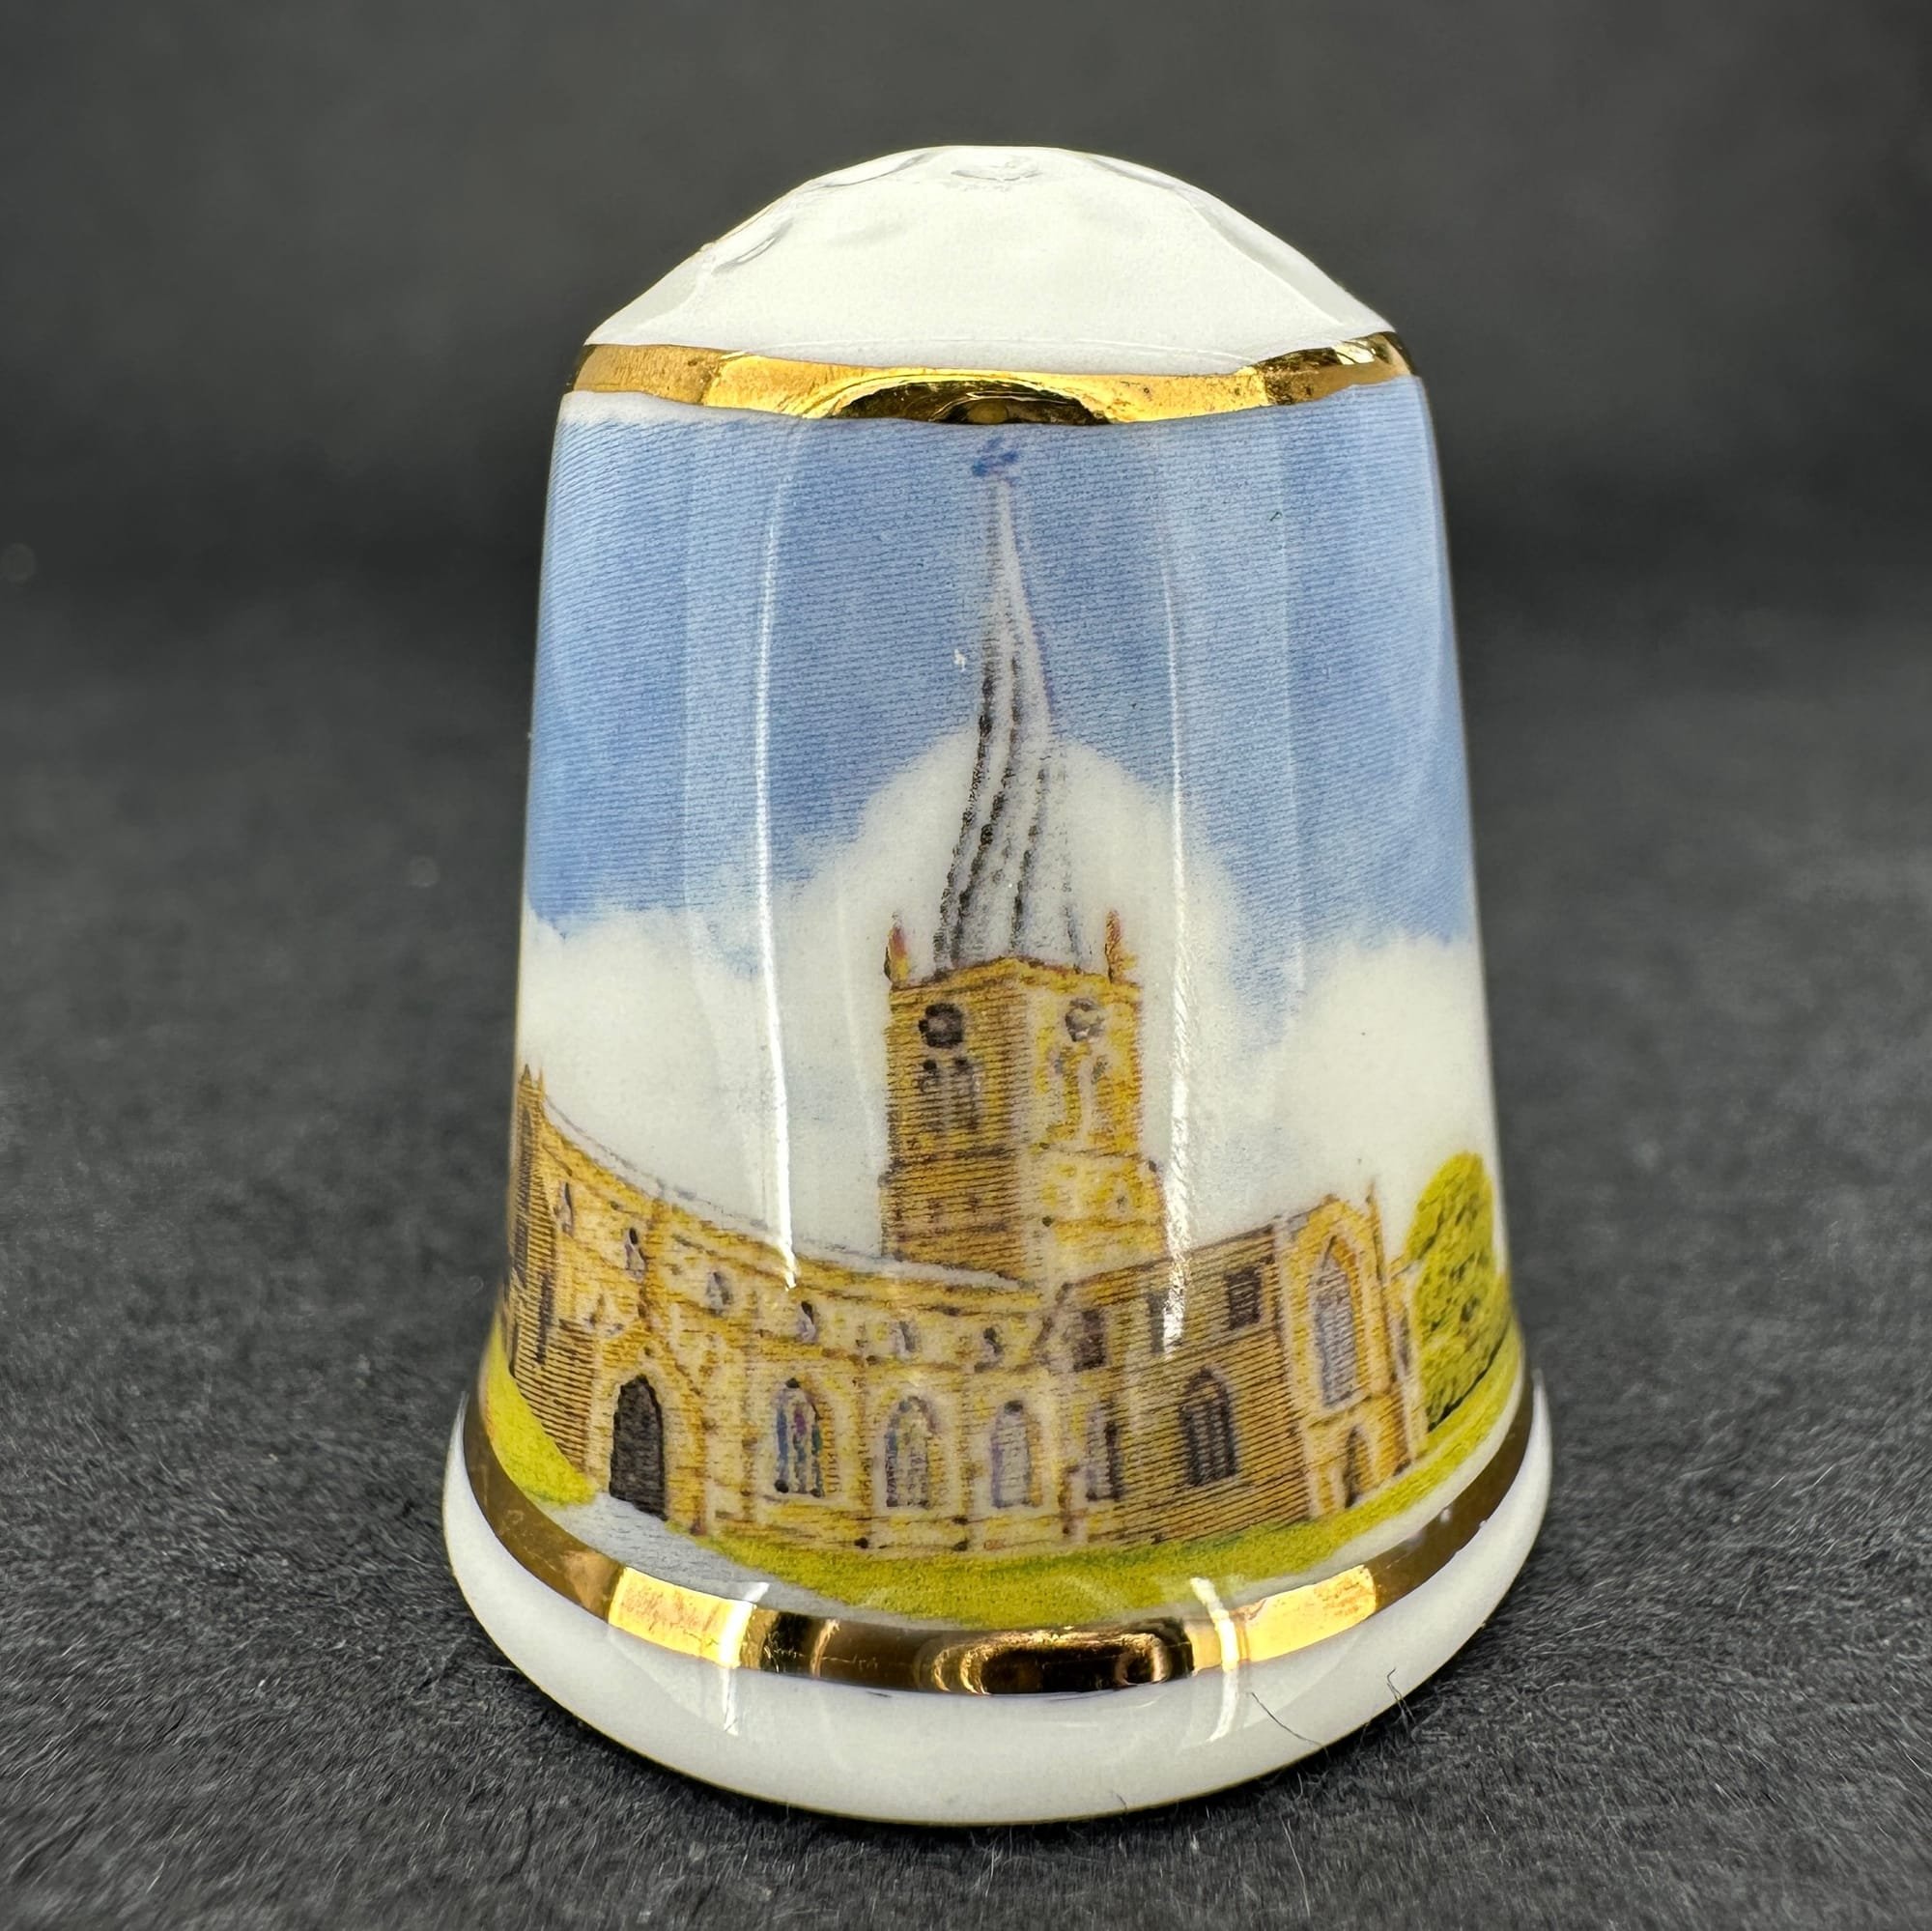 Chesterfield Crooked Spire China Thimble by Ayshford